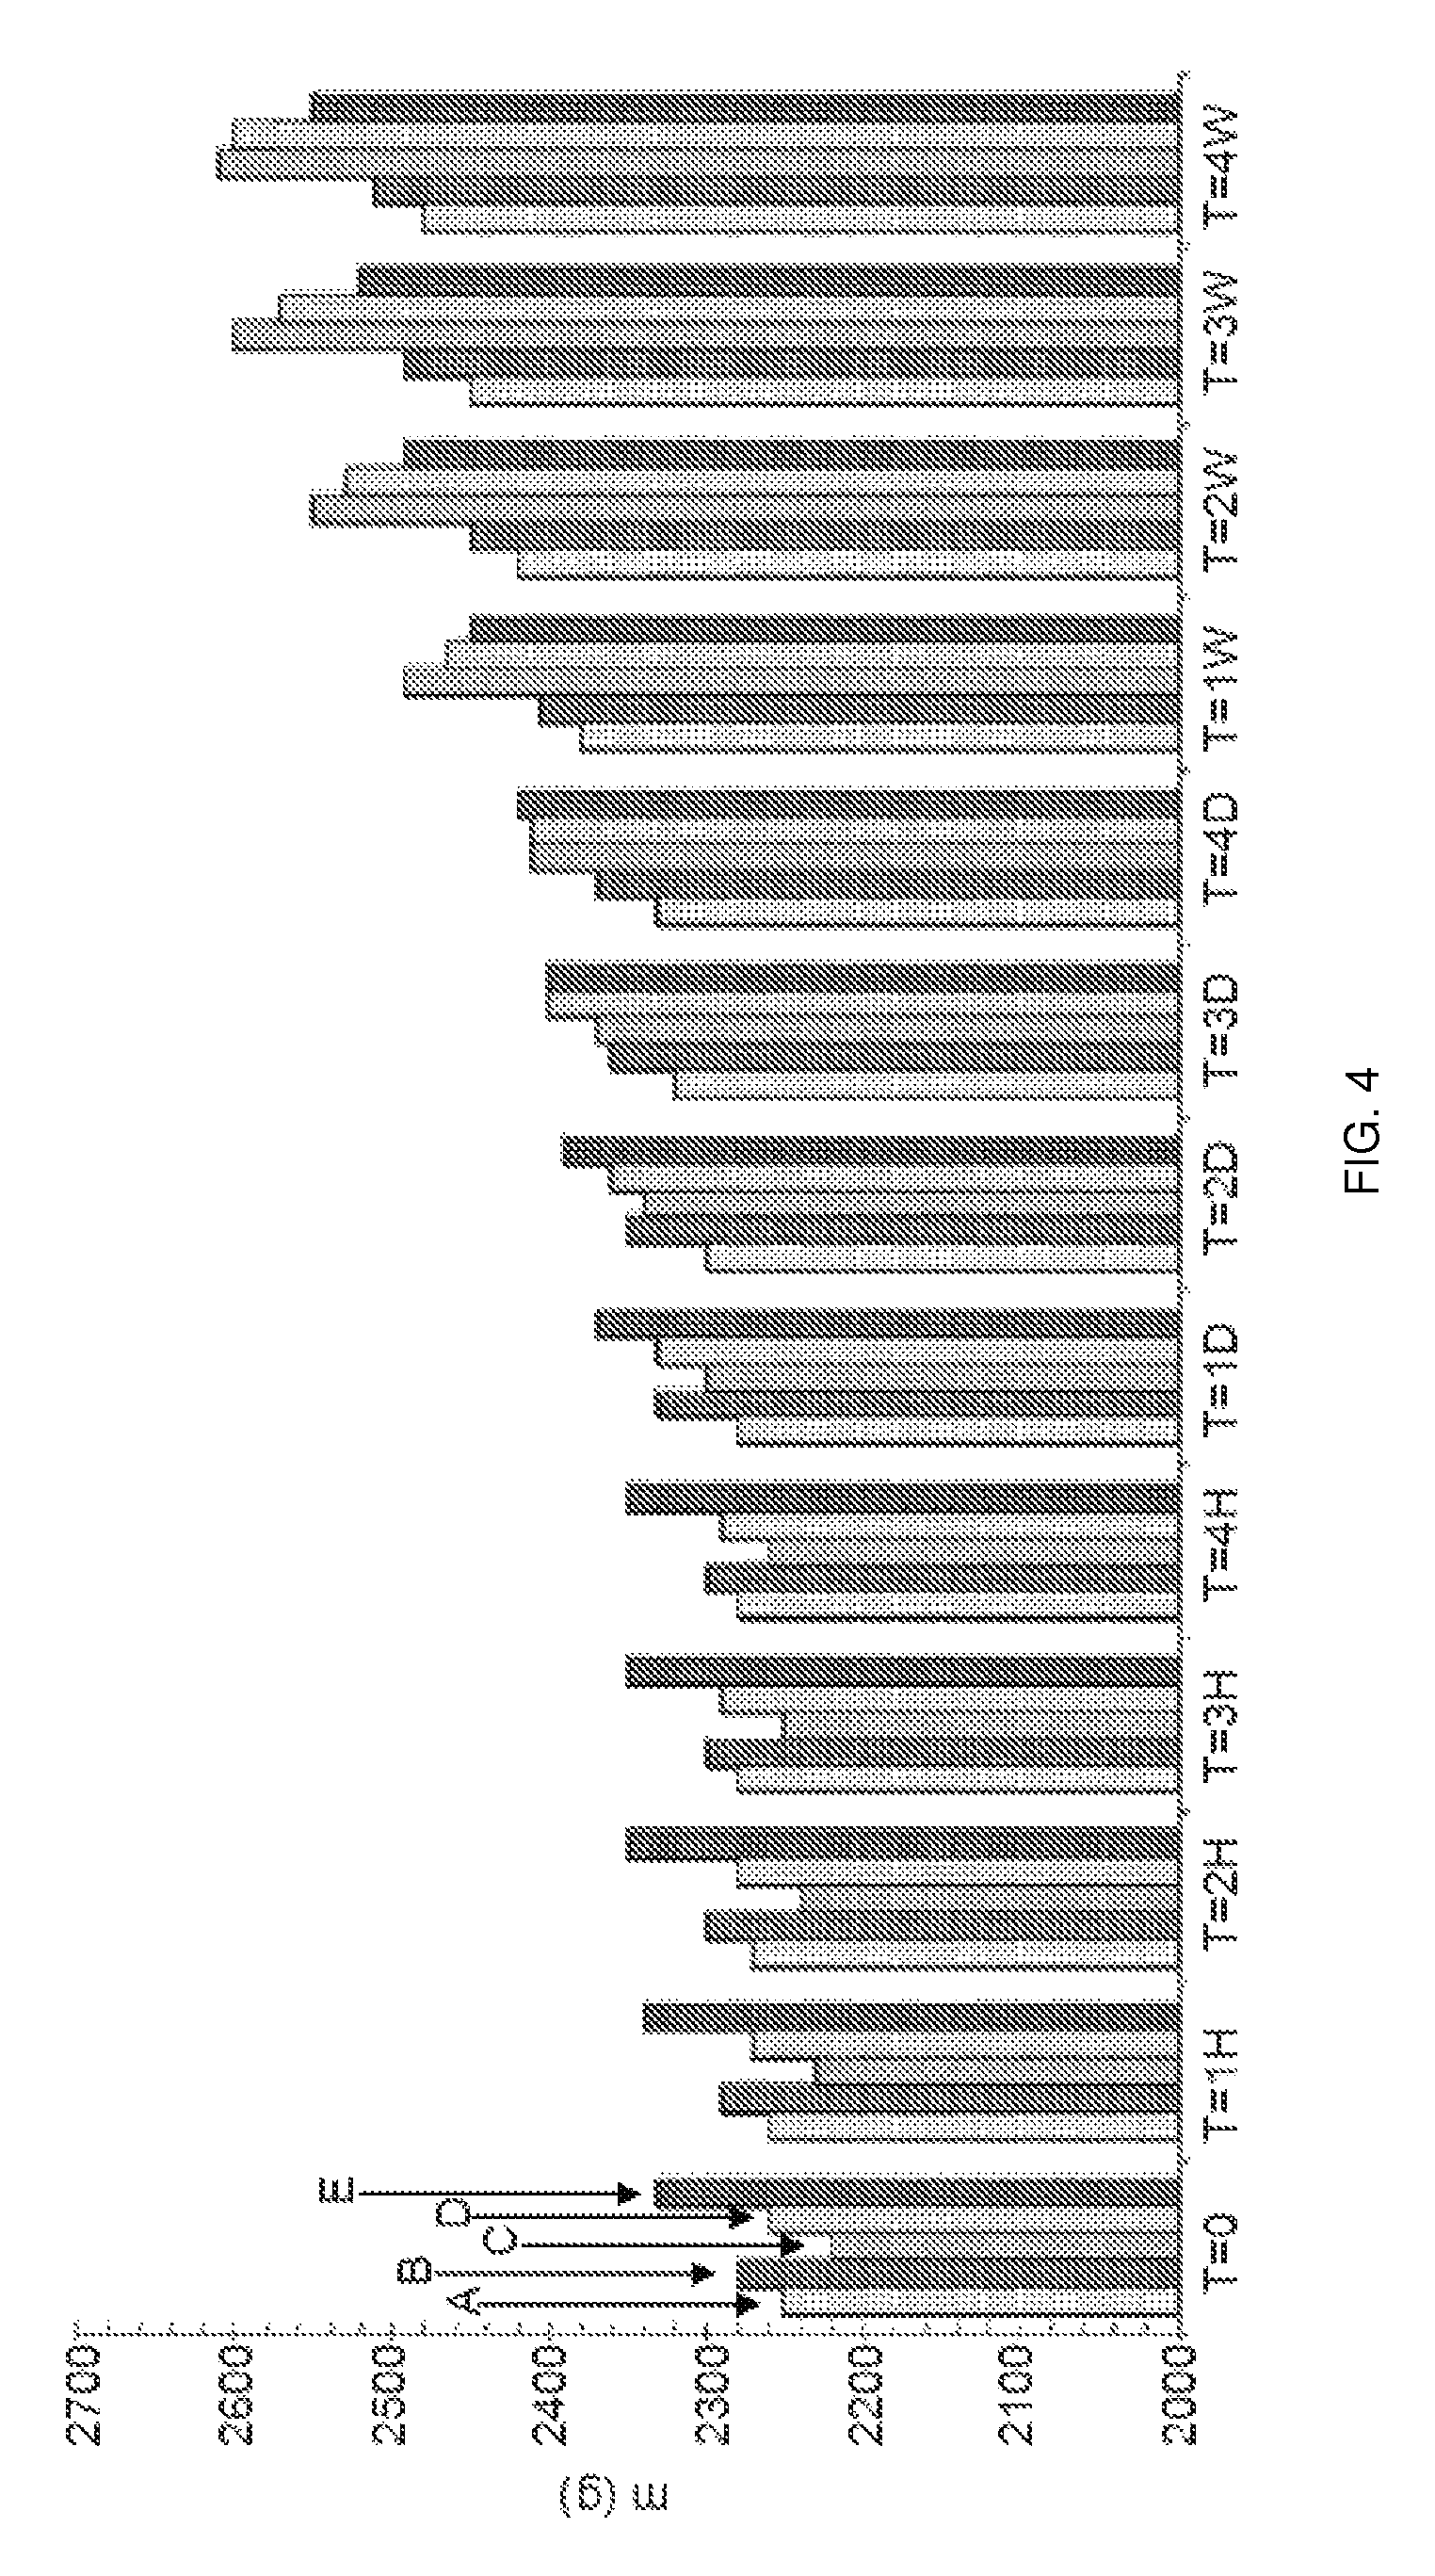 Core sheath drug delivery devices